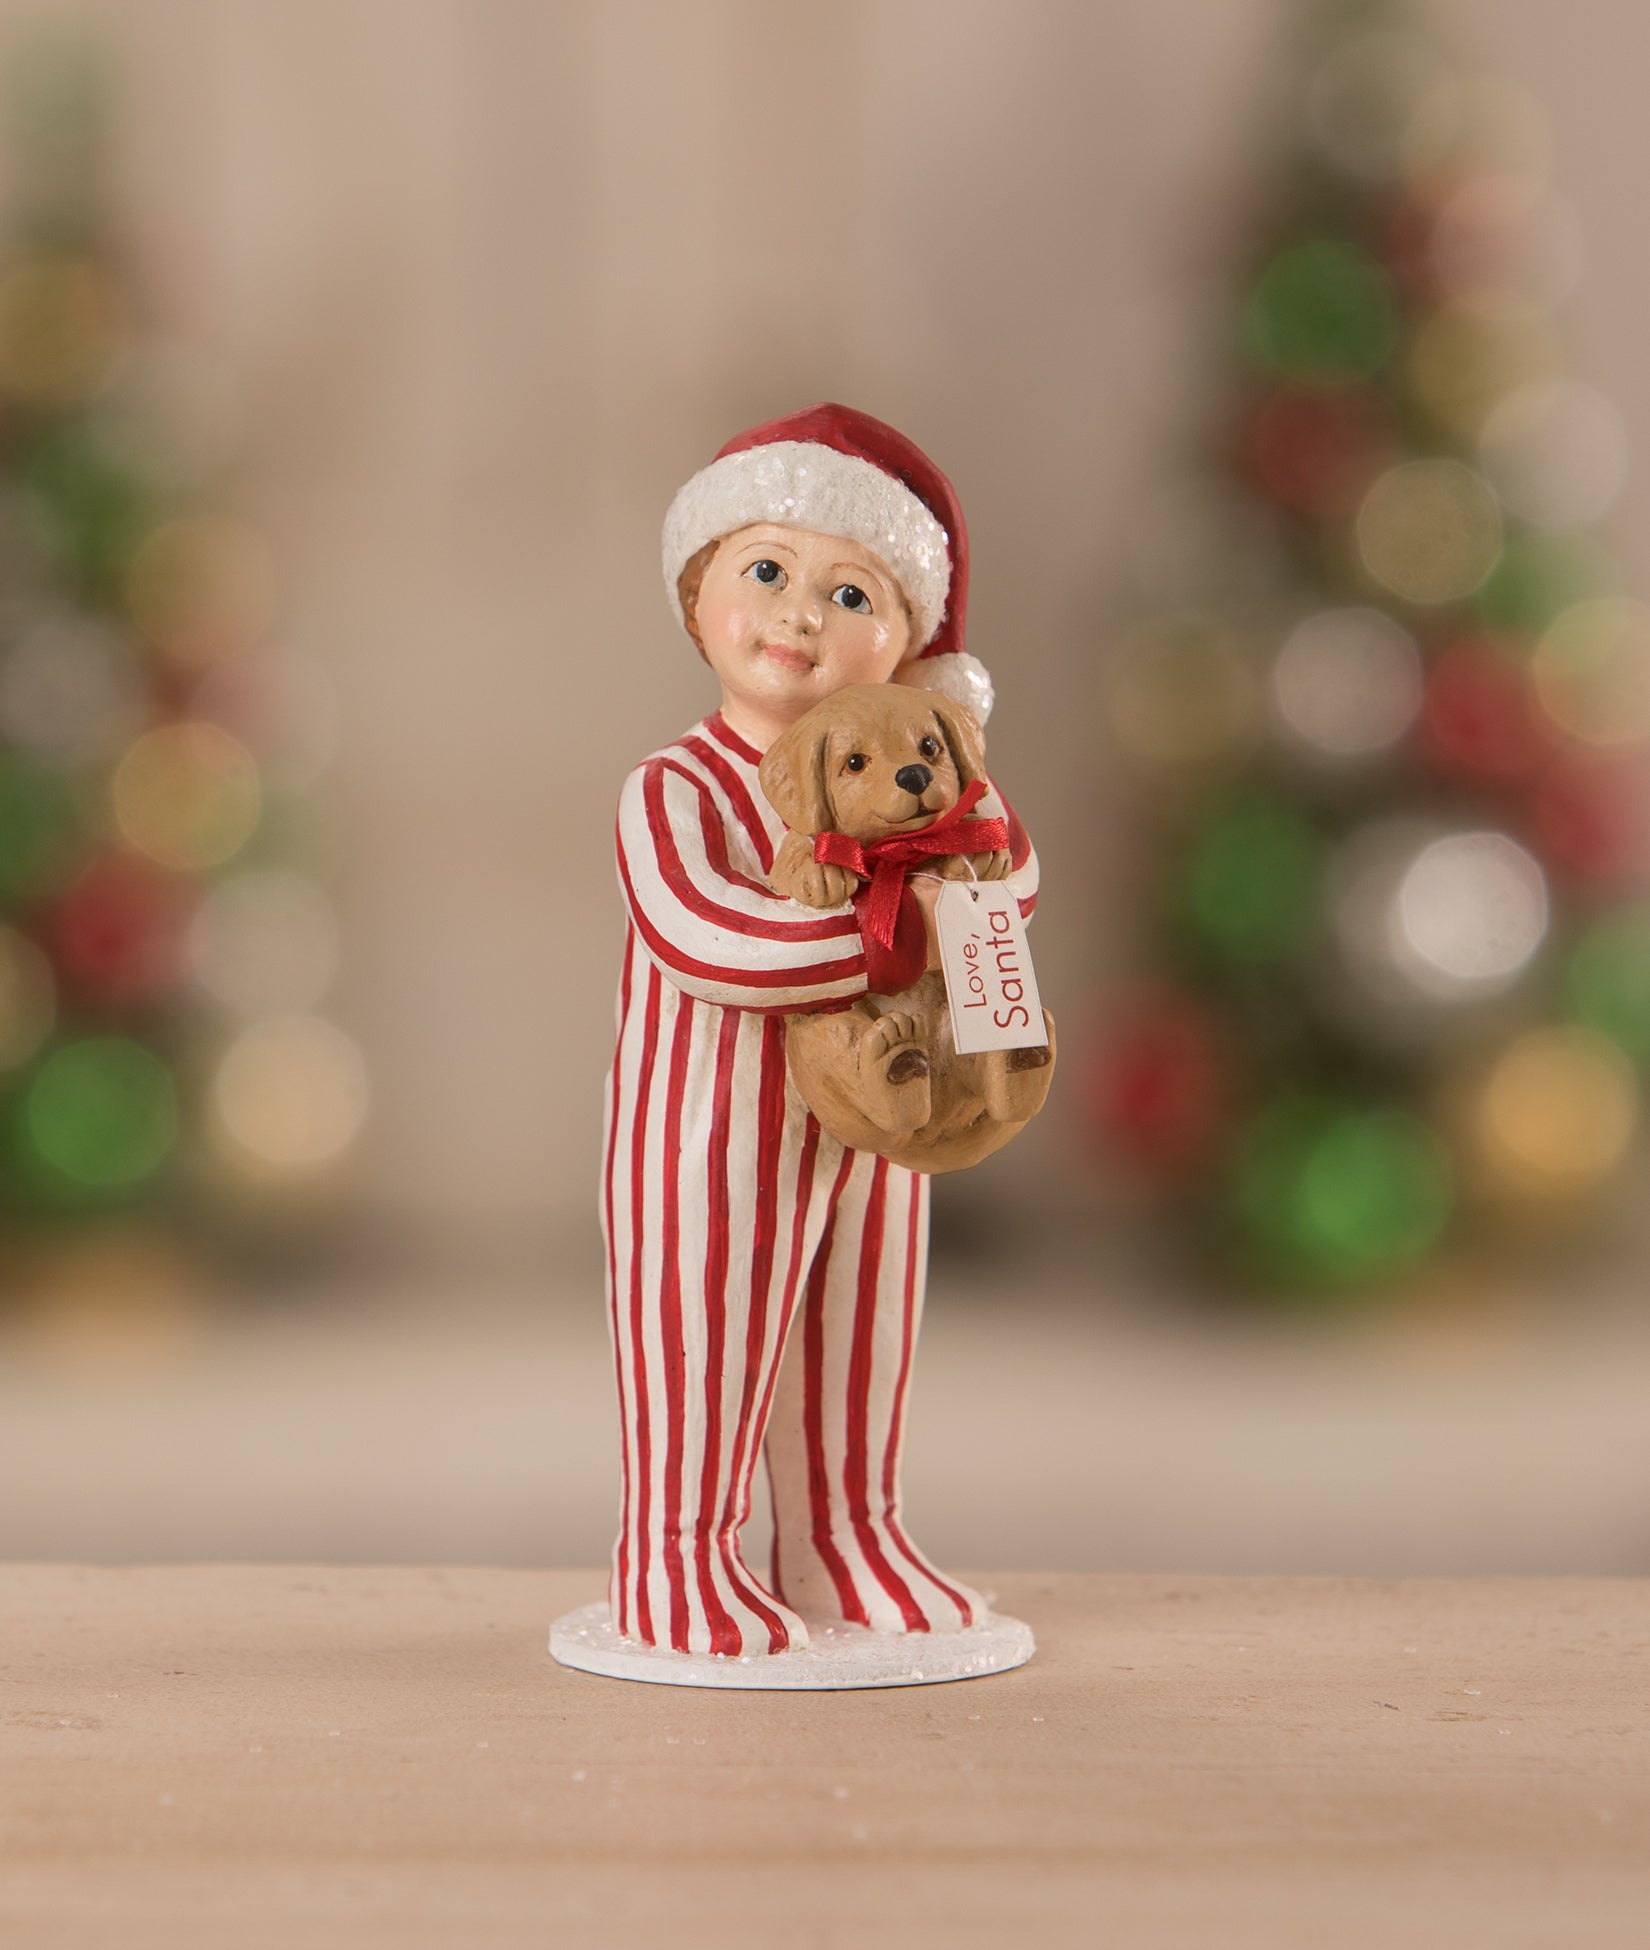 Landon's Christmas Puppy Surprise Figurine by Bethany Lowe